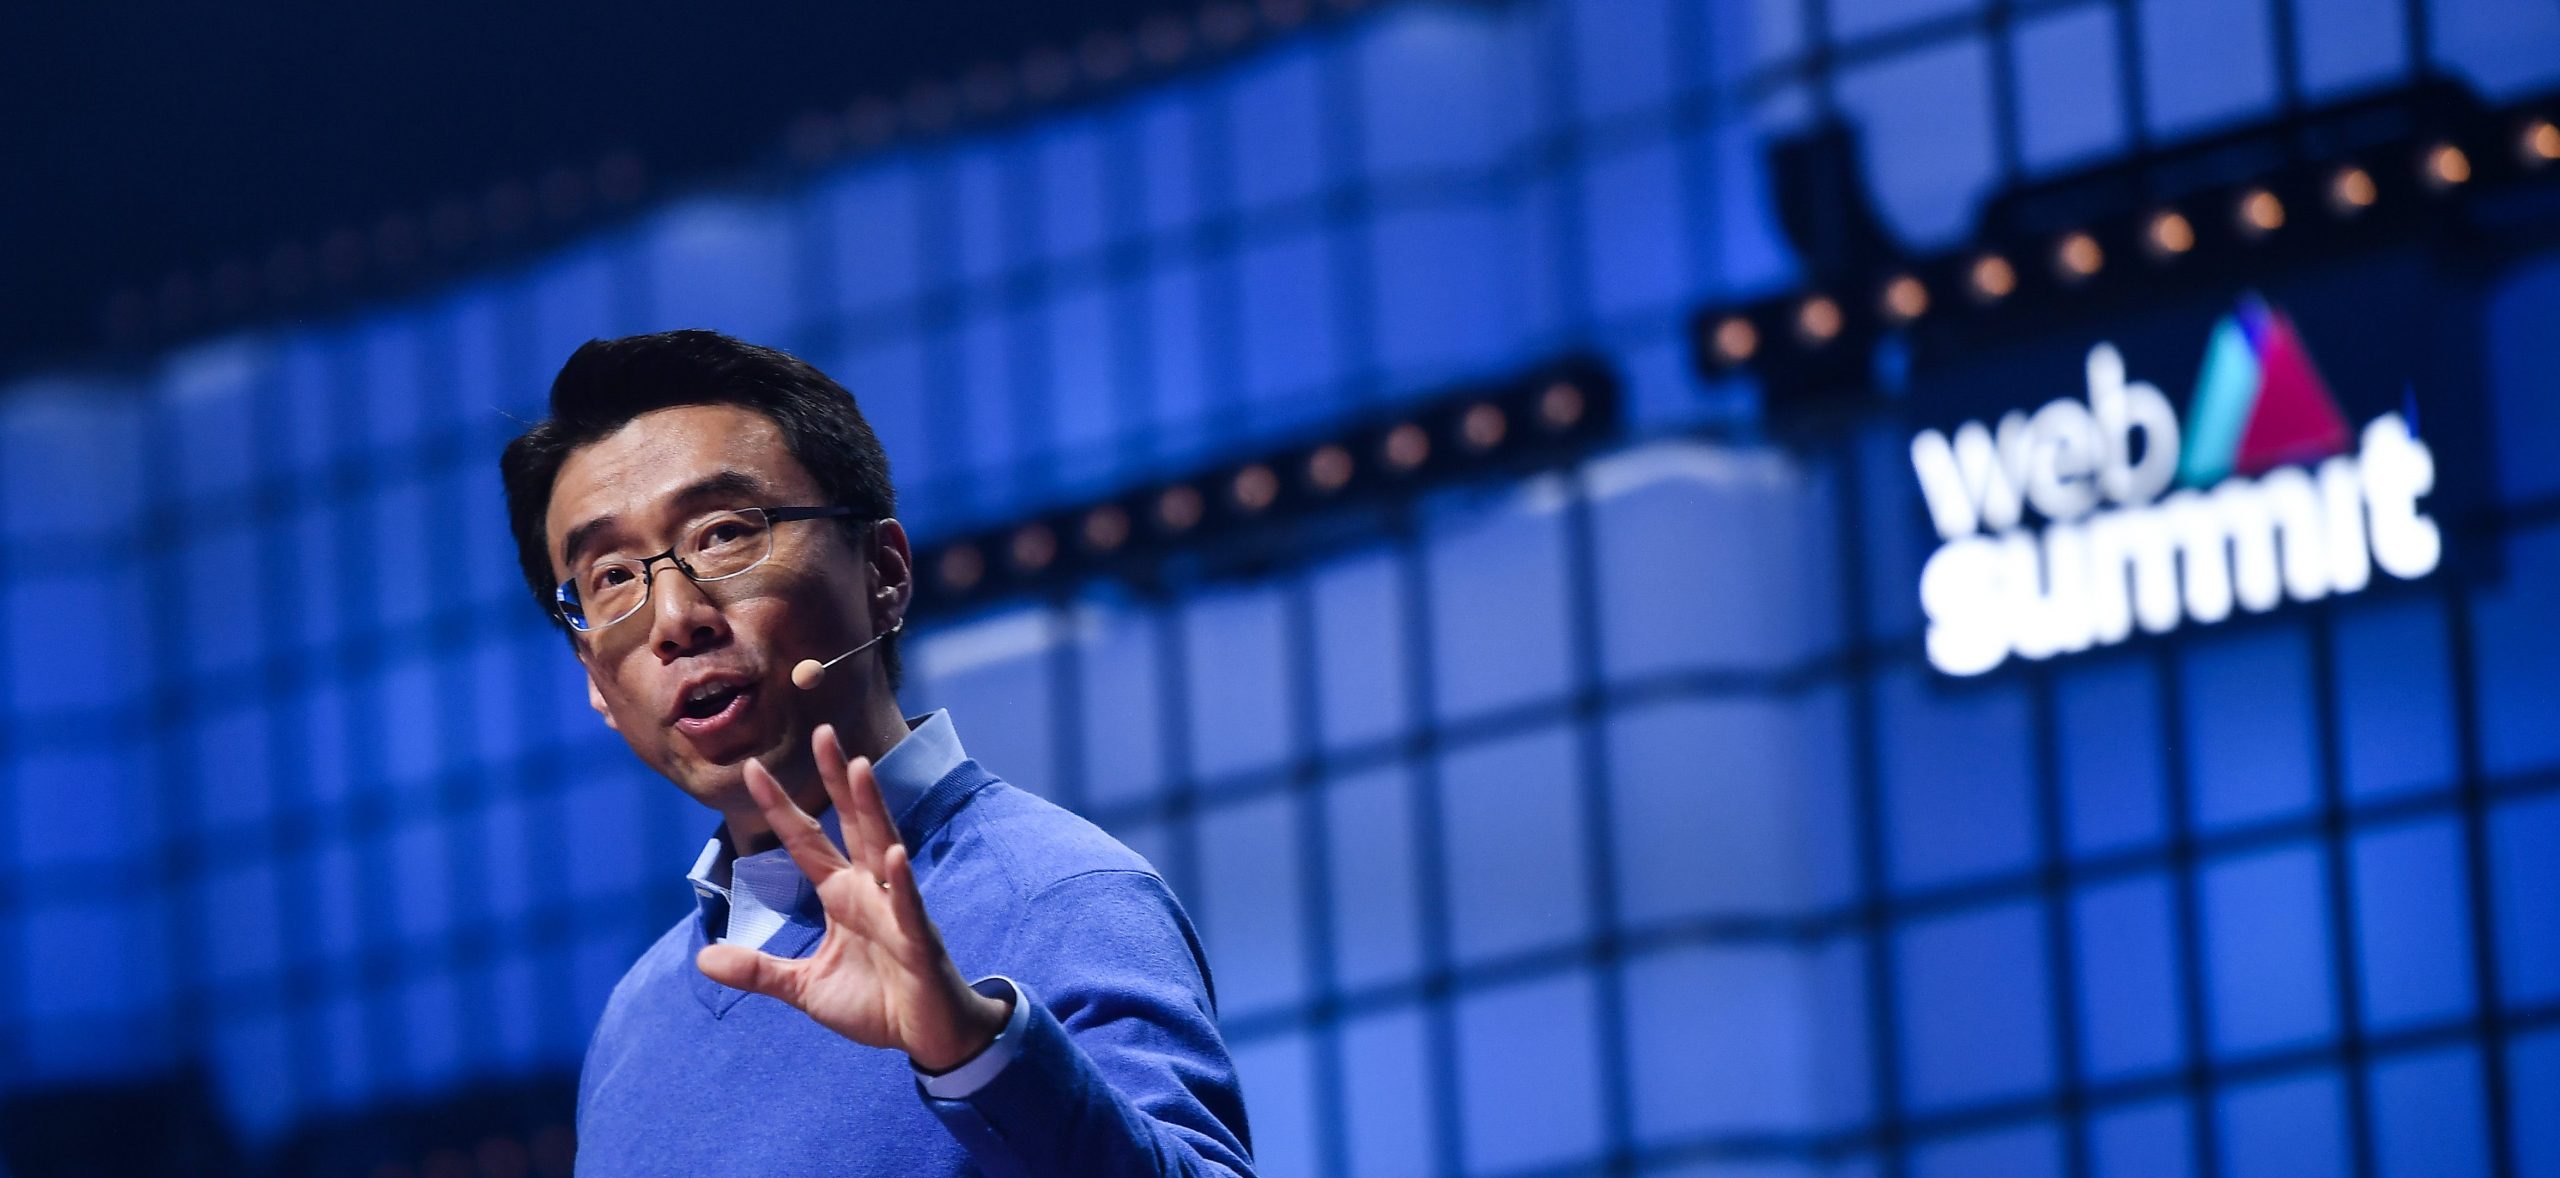 David Eun, Chief Innovation Officer, Samsung Electronics & President, Samsung NEXT , Samsung, on Centre Stage during the opening day of Web Summit 2019 at the Altice Arena in Lisbon, Portugal.